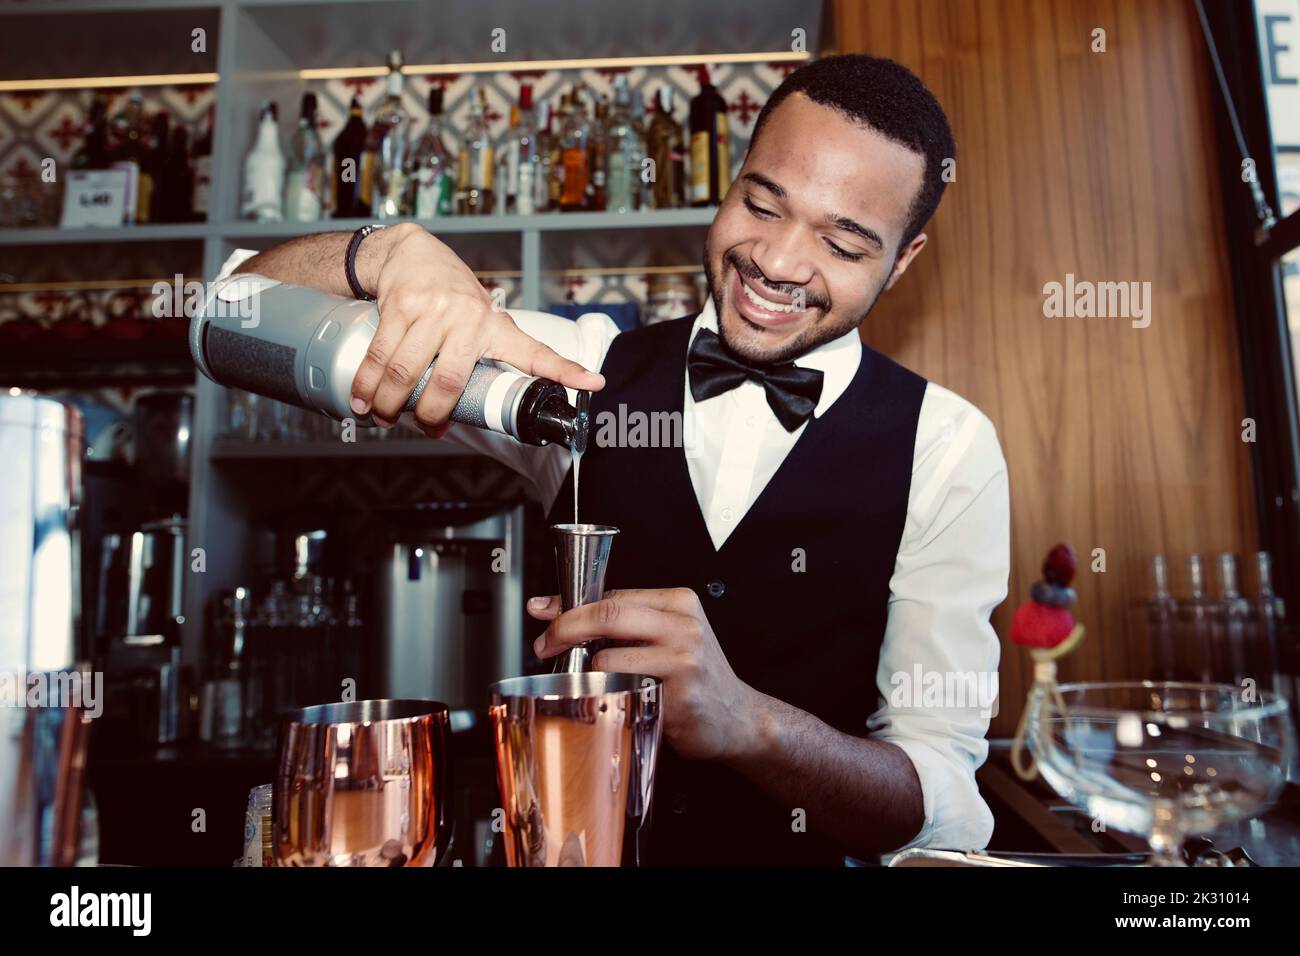 Smiling barman pouring syrup into jigger through bottle at bar Stock Photo